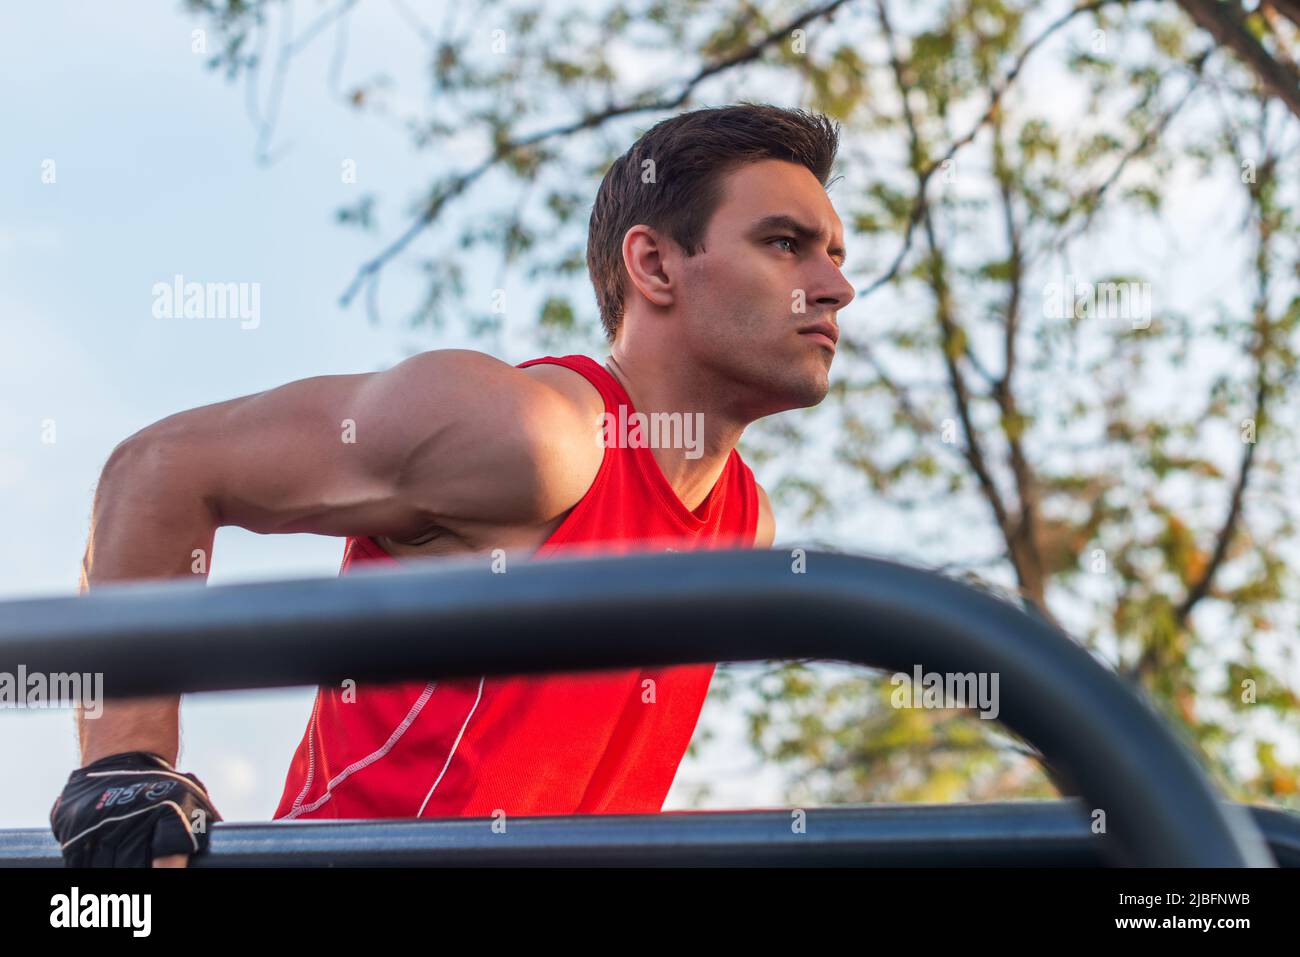 Fit man doing triceps dips on parallel bars at park exercising outdoors. Stock Photo